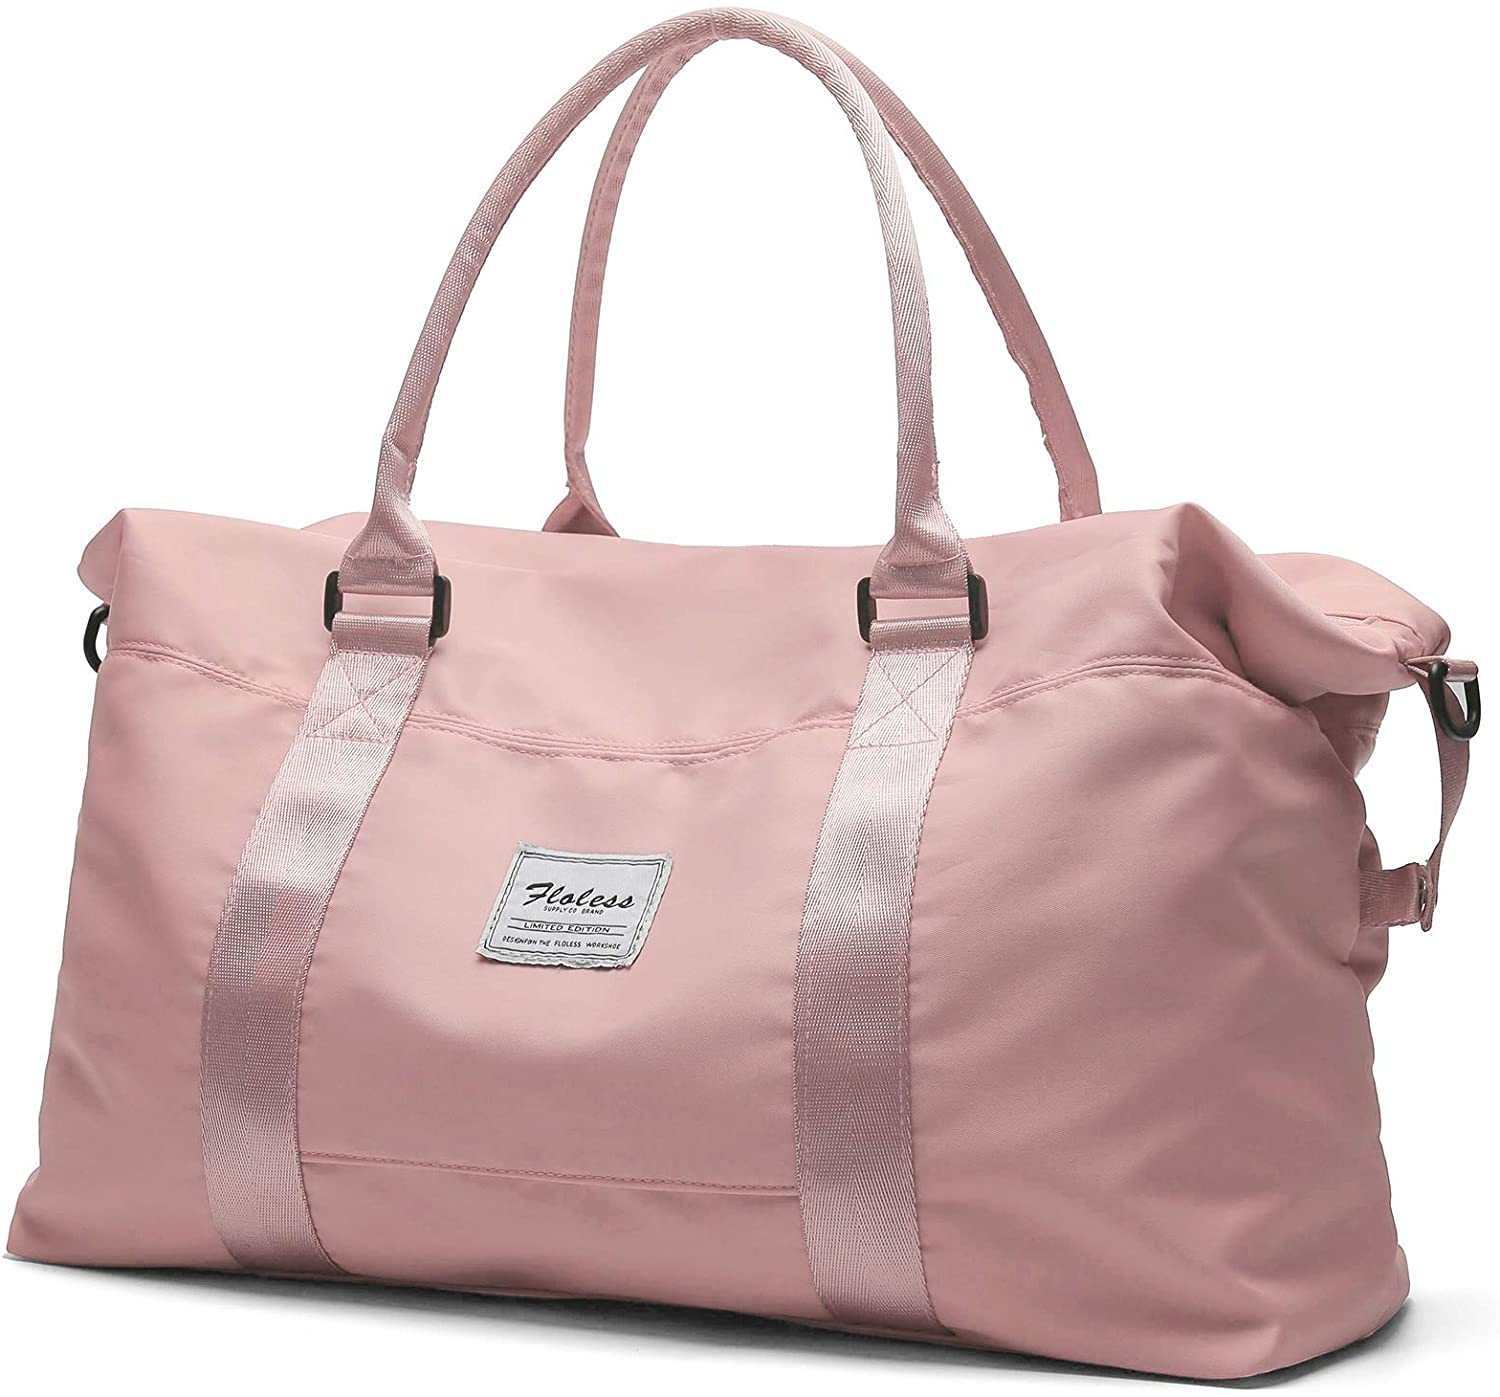 

Pink Travel Duffel Bag,Sports Tote Gym Bag,Shoulder Weekender Overnight Bag For Women,With Trolley Sleeve And Wet Pocket